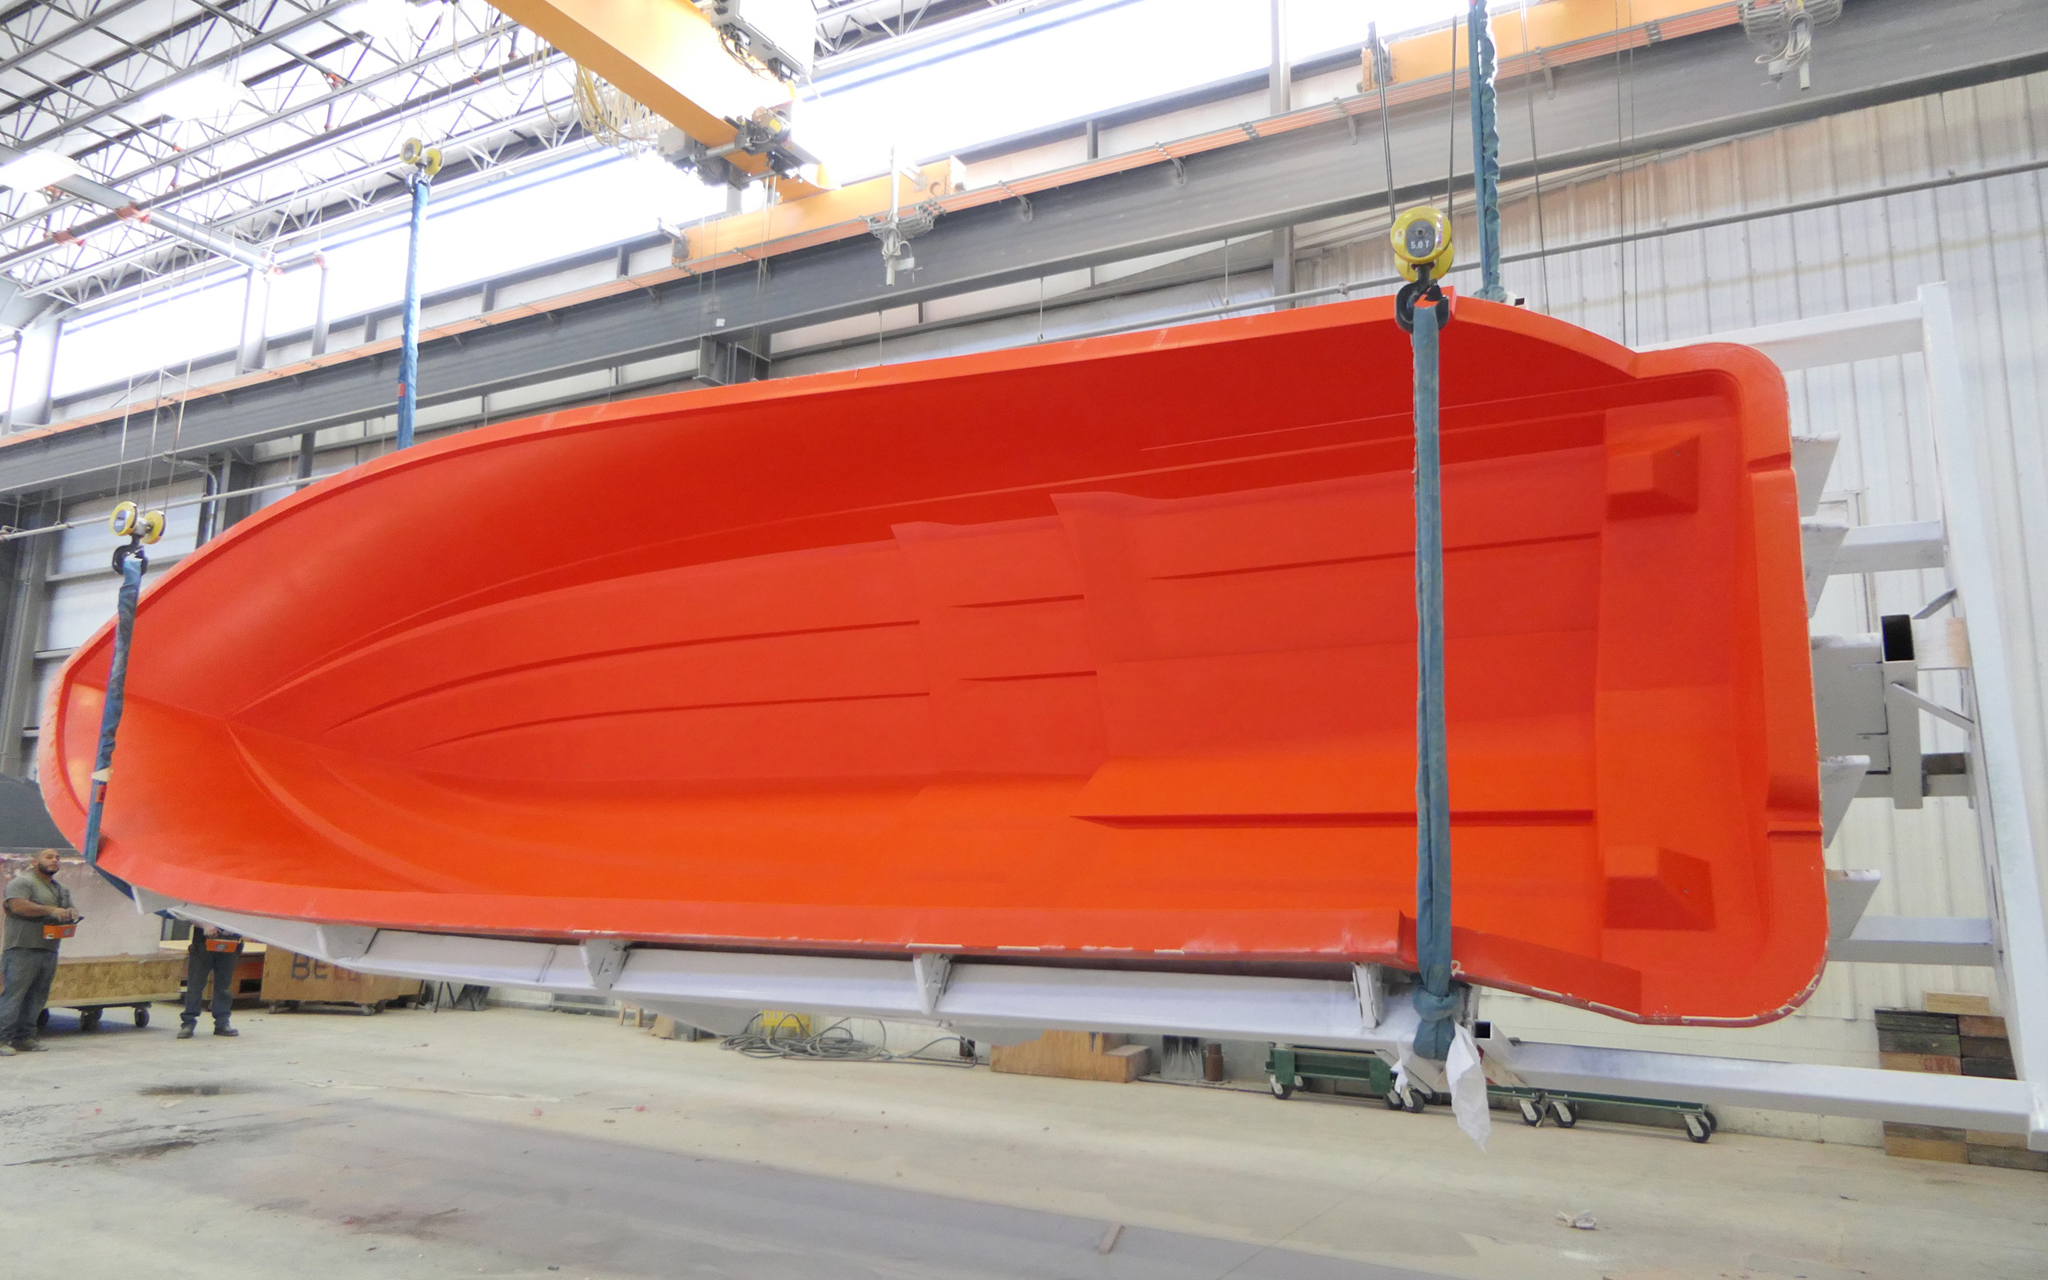 The hull mold is rotated after de-molding